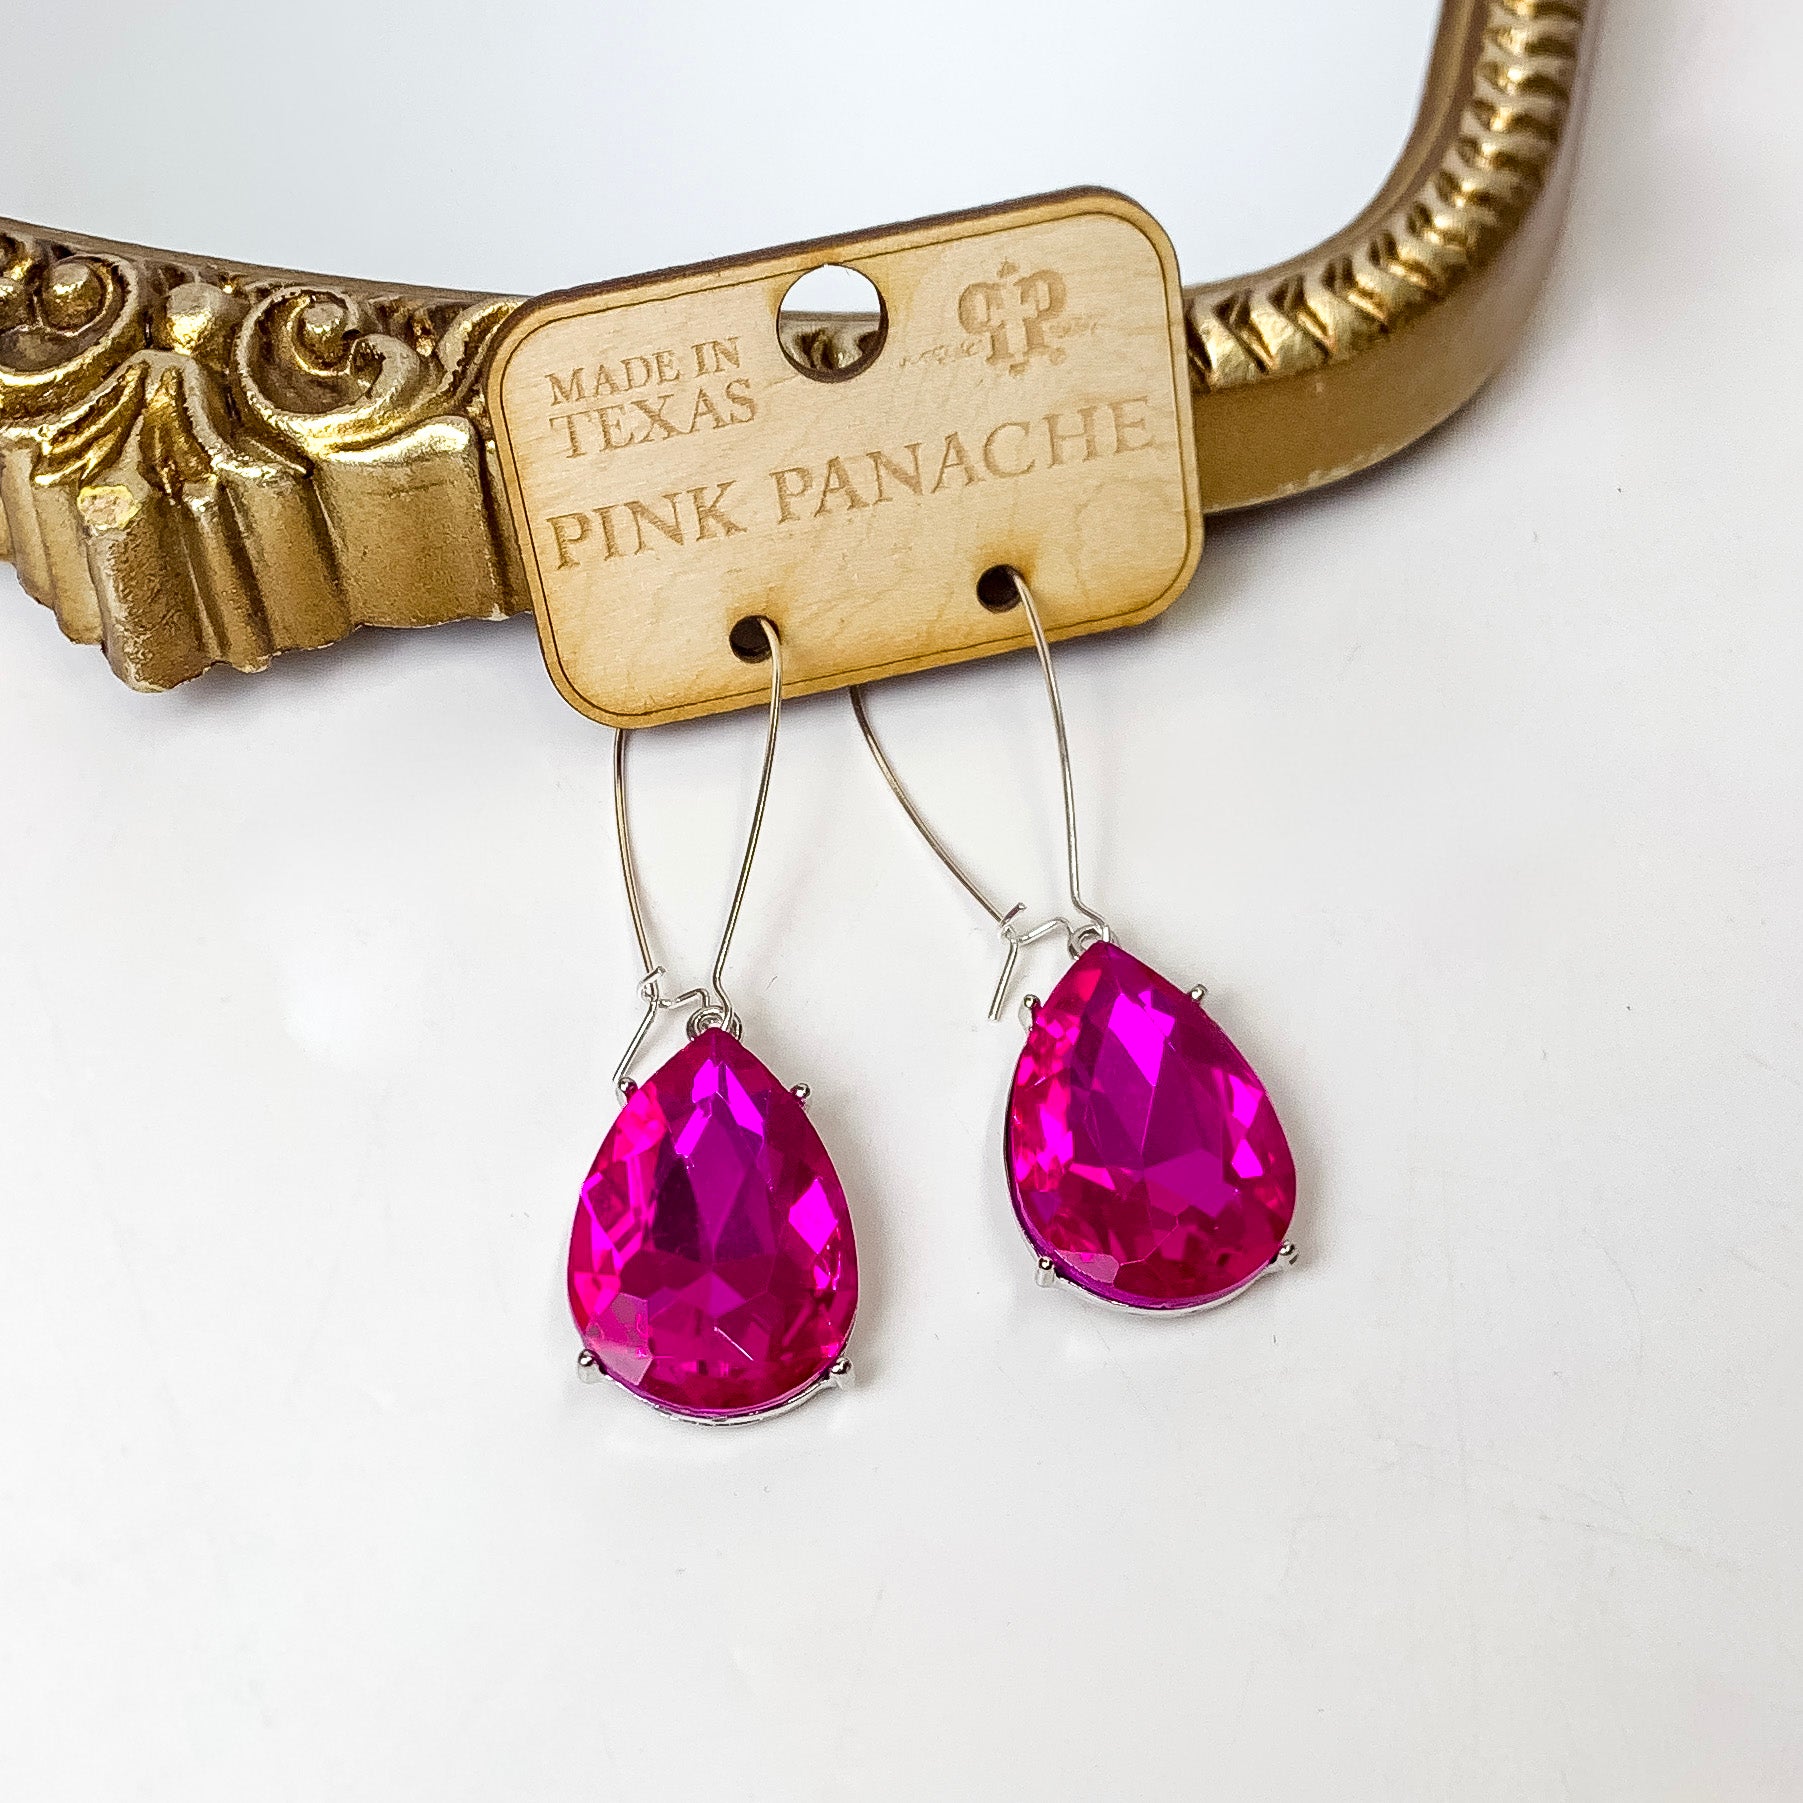 Pink Panache | Silver Tone Kidney Wire Crystal Teardrop Earrings in Fuchsia Pink - Giddy Up Glamour Boutique